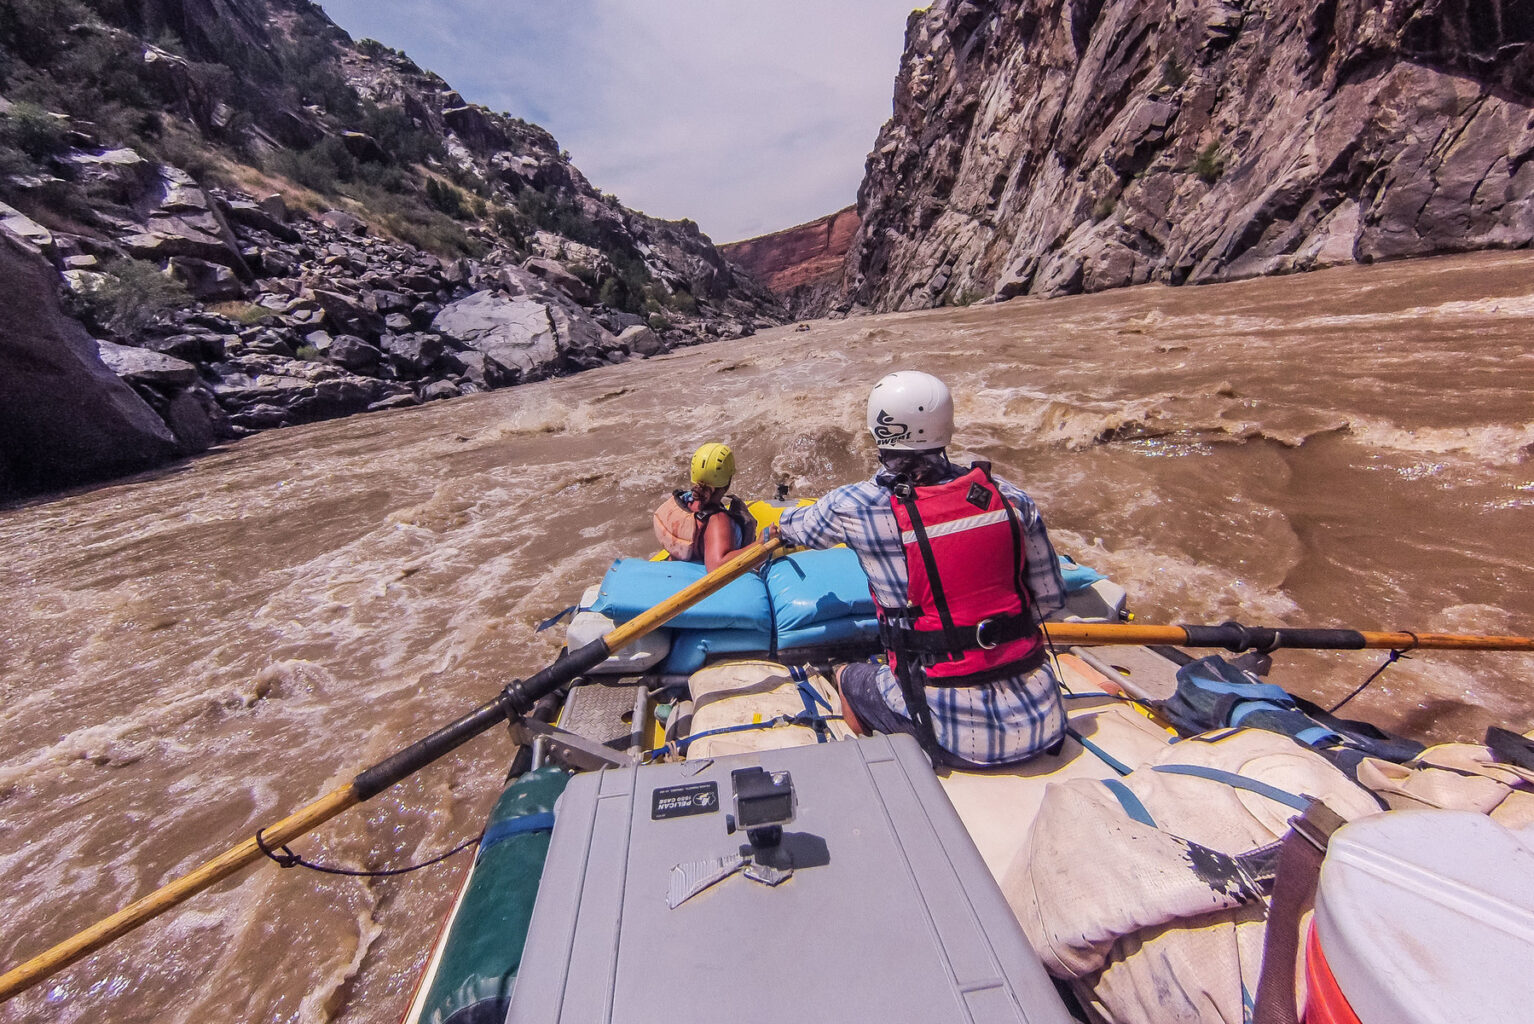 Going through rapids on an OARS Westwater trip